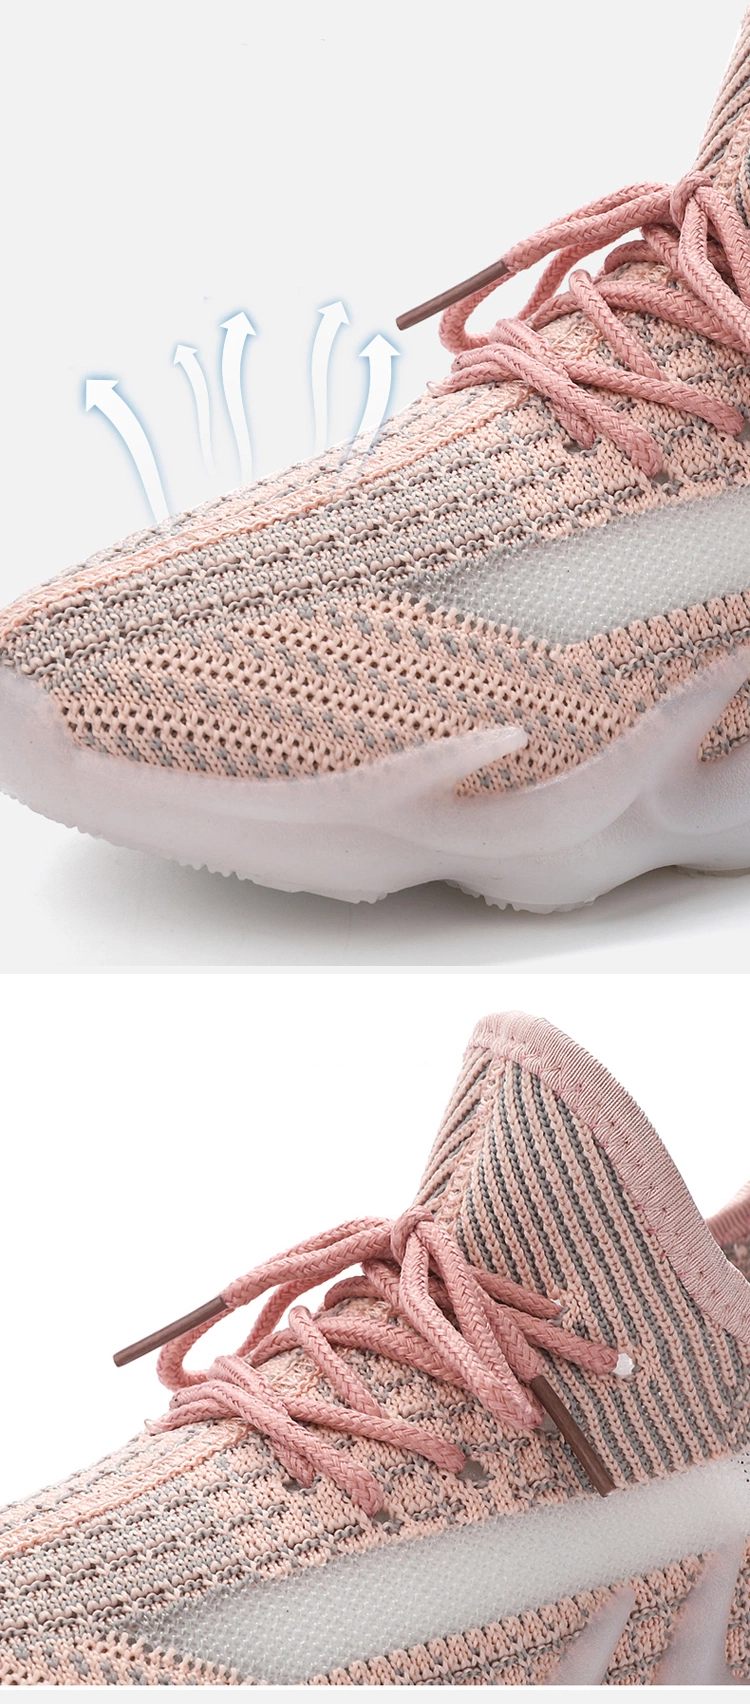 Chic Jelly Sole Fly Knitting Breathable Lady Walking Casual Women Sneaker